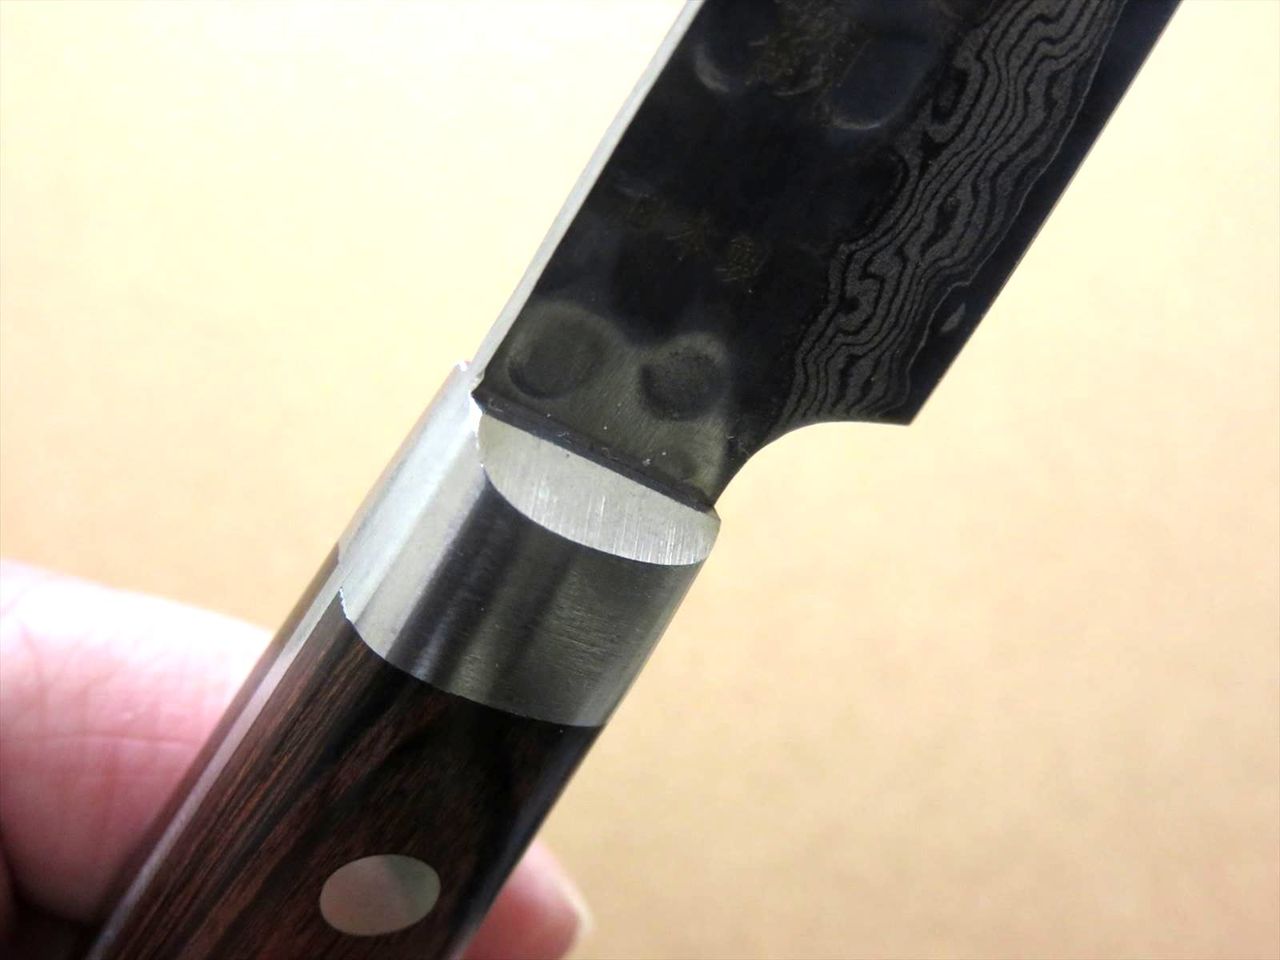 Japanese FUJIMI Kitchen Paring Knife 3" Hammer Forged VG-10 Damascus From JAPAN